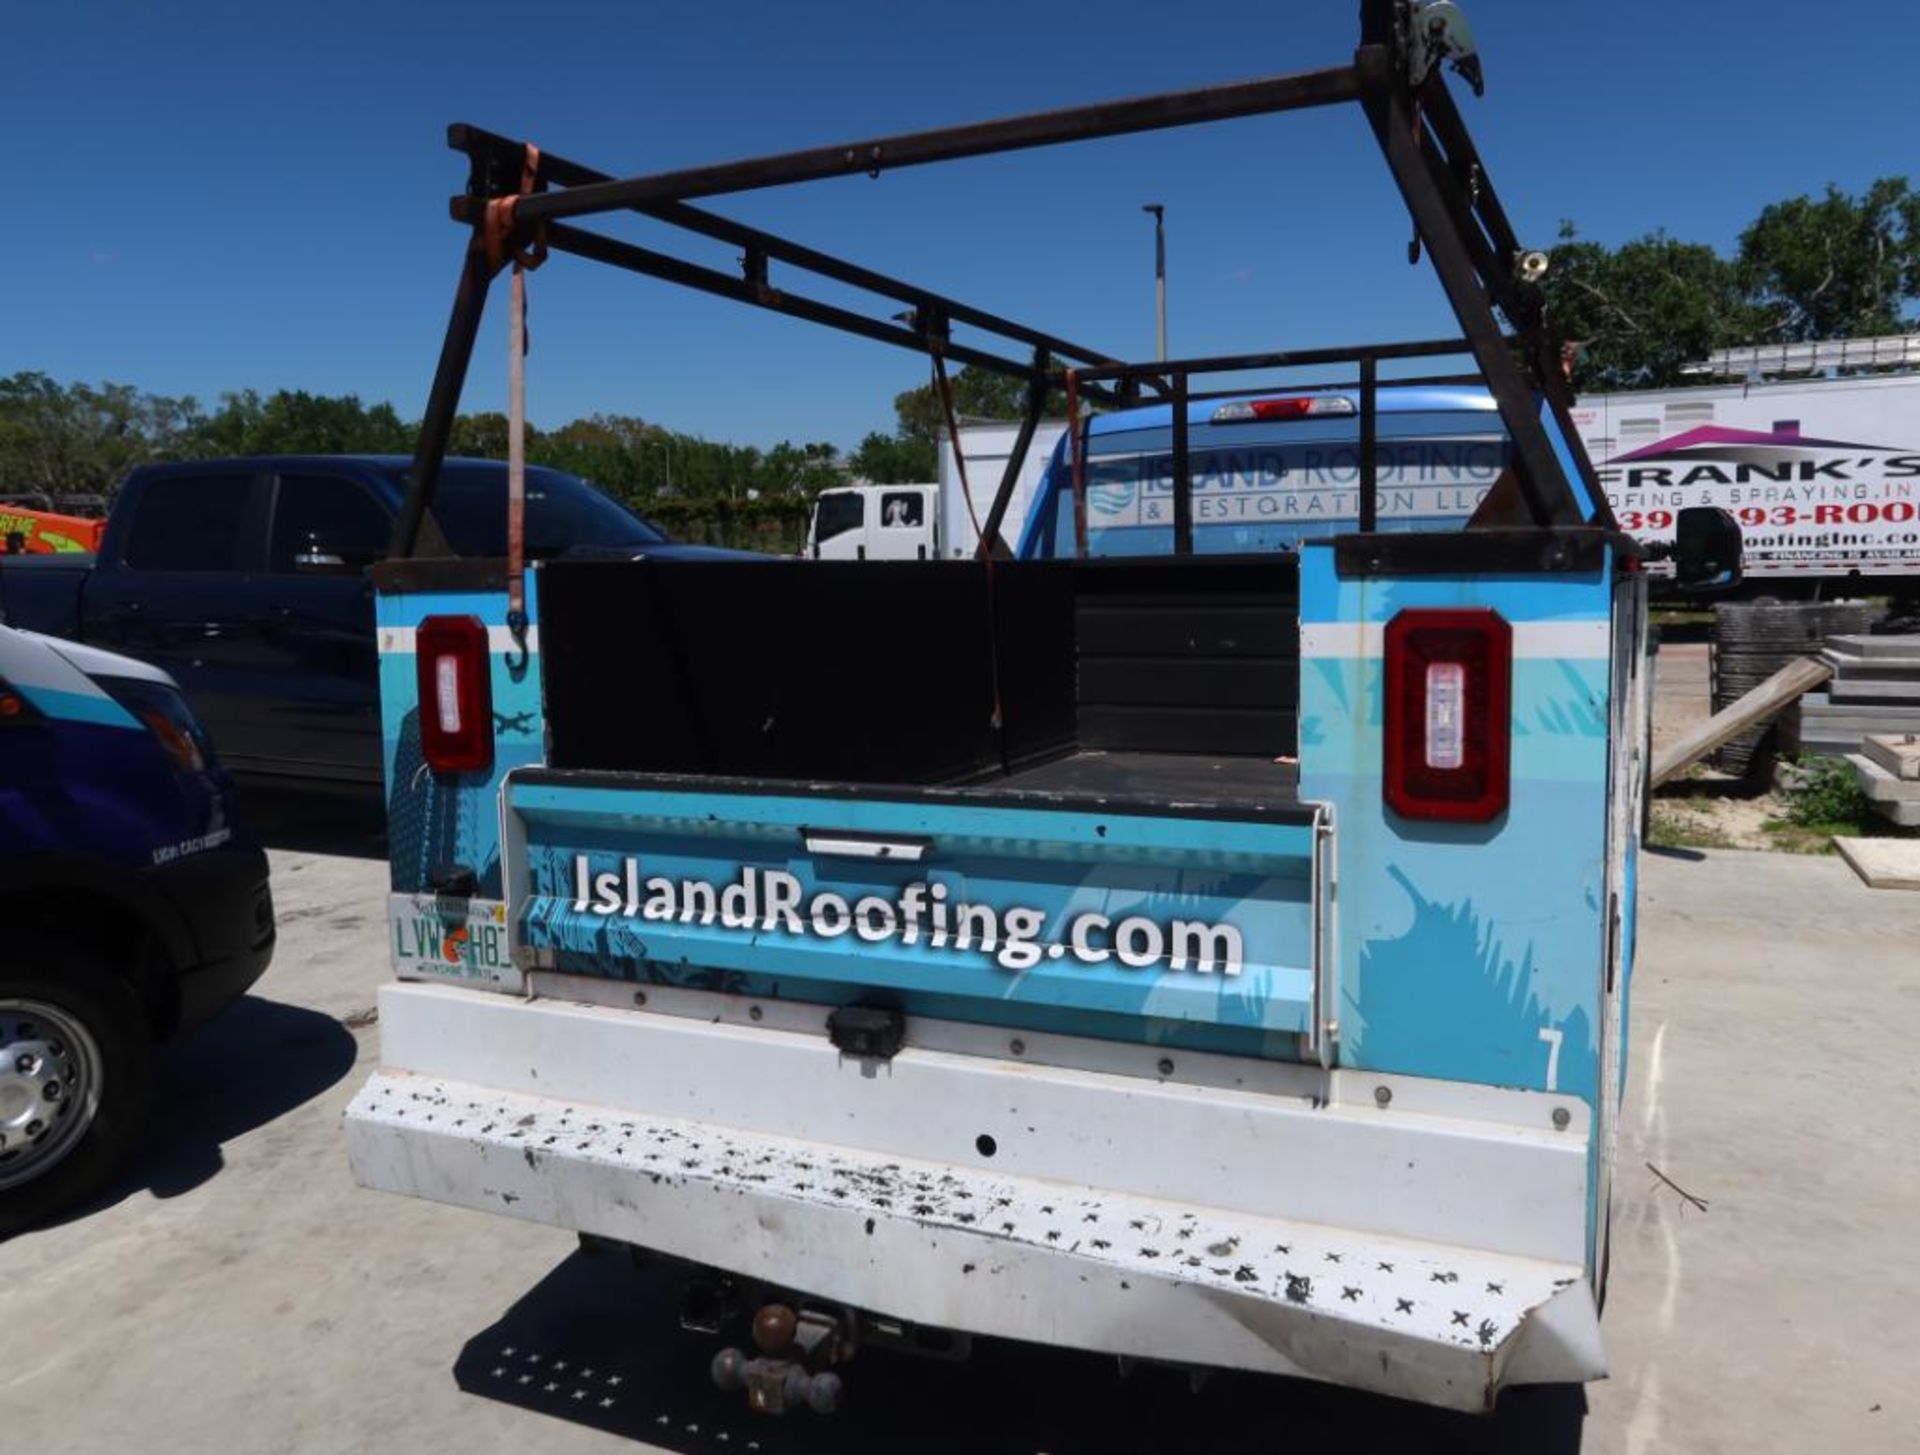 2019 Ford F-250 4 Door Service Body w/Ladder Rack, Gas, License# LVW-H83, VIN 1FD7W2A66KED43926, 88, - Image 3 of 6